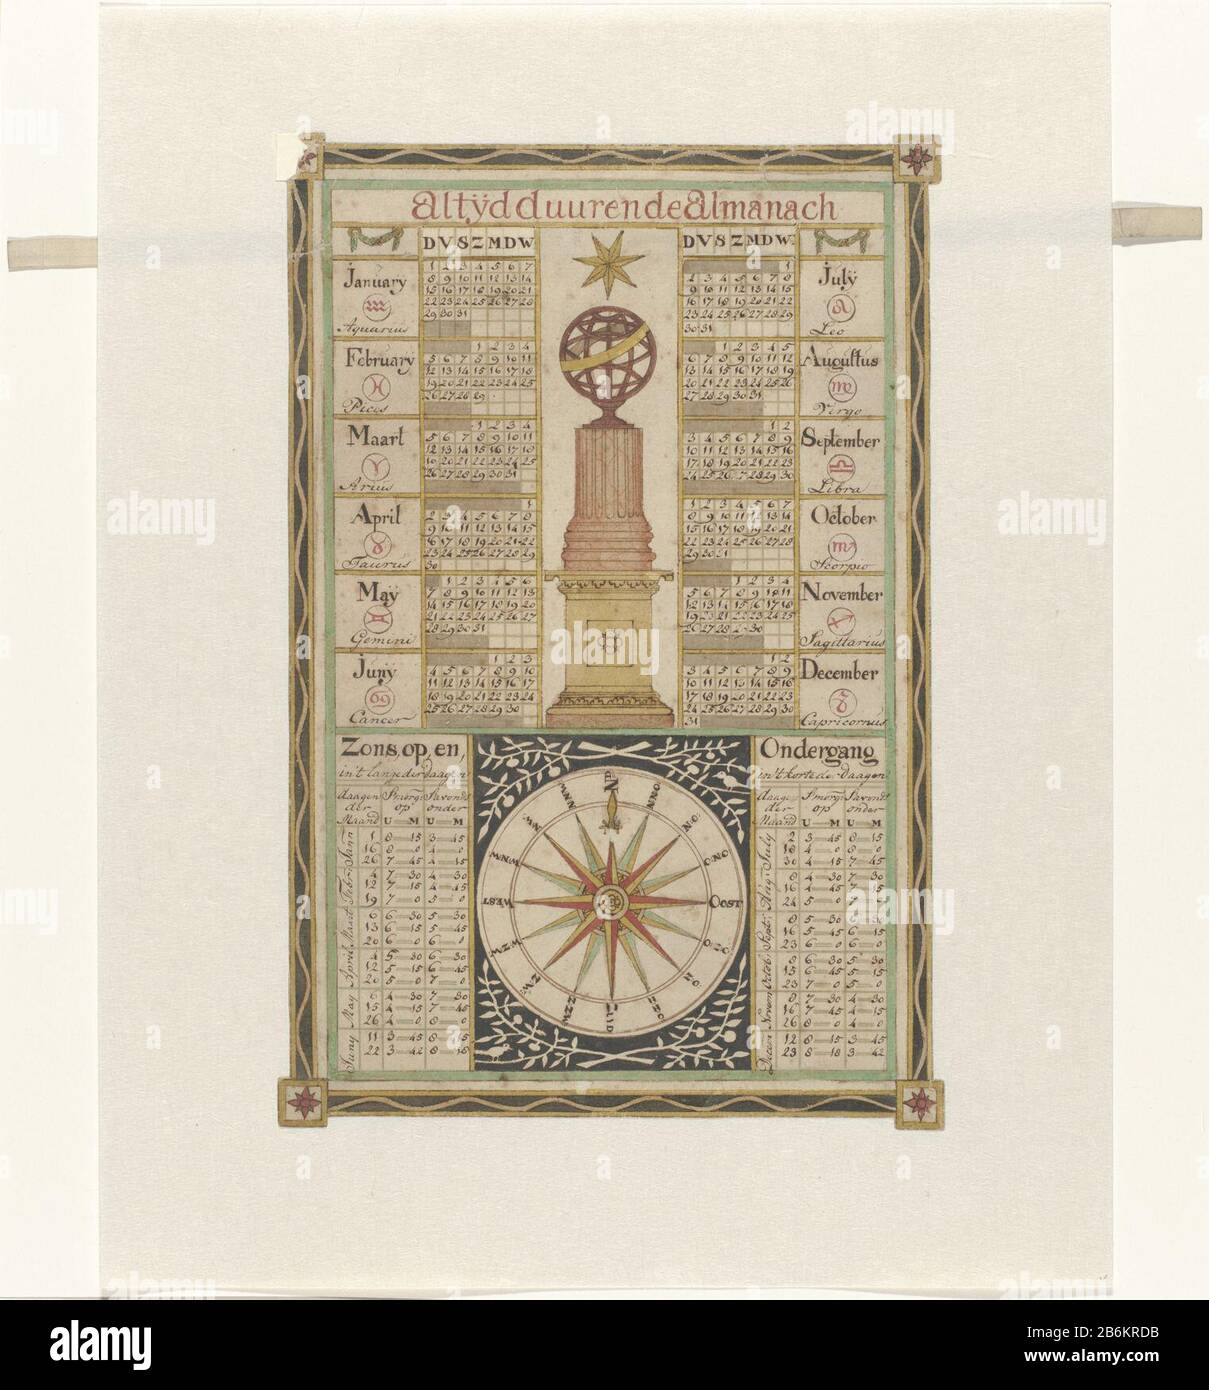 Perpetual calendar (always expensive income almanach) Calendar on the left  and right names of the six months, and the constellations are grouped under  each other. In between there is a globe on